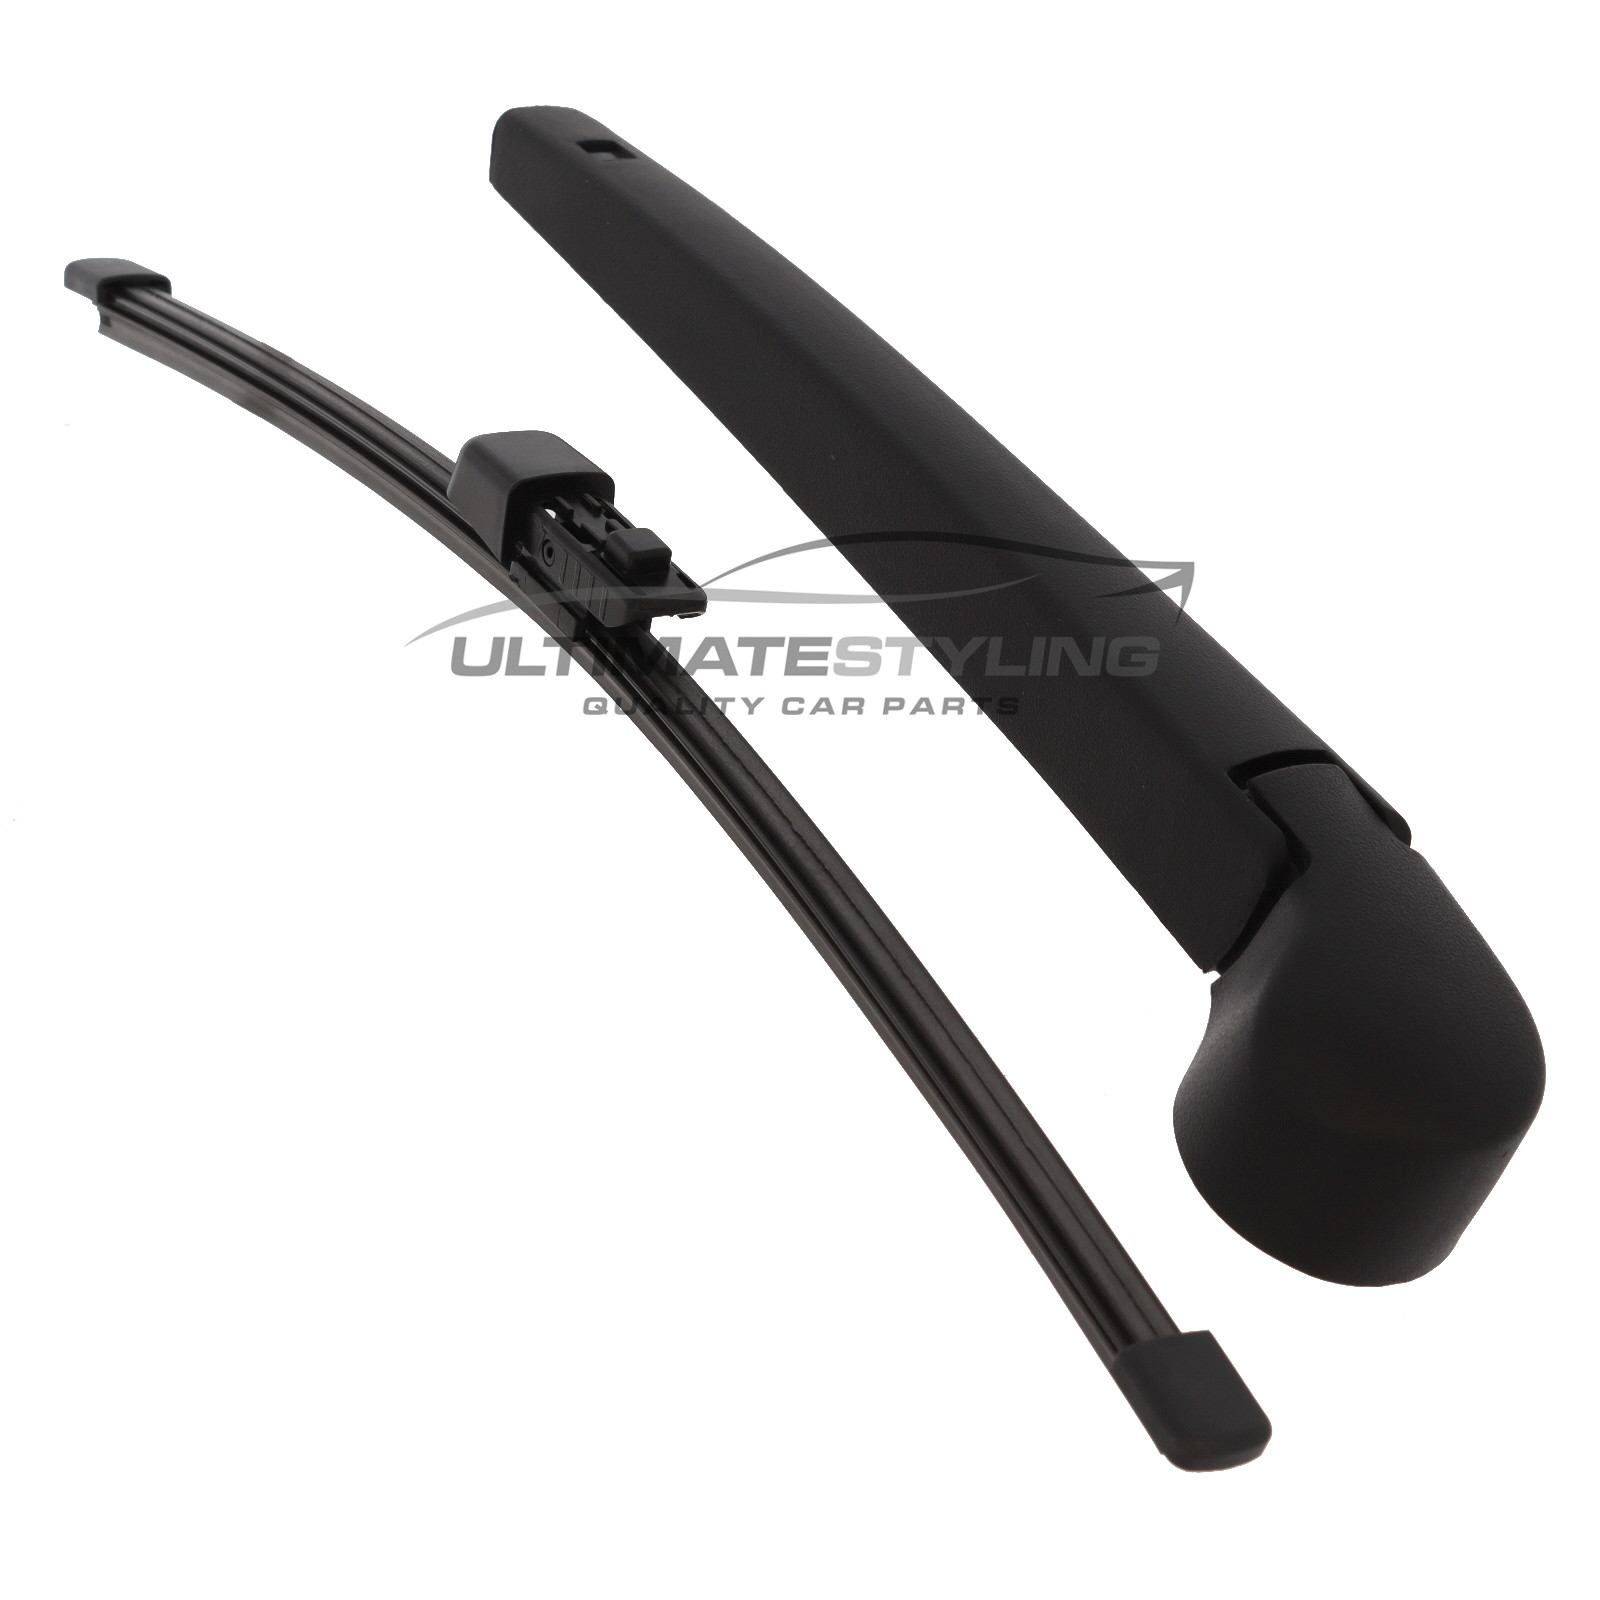 Rear Wiper Arm & Blade Set for Seat Alhambra